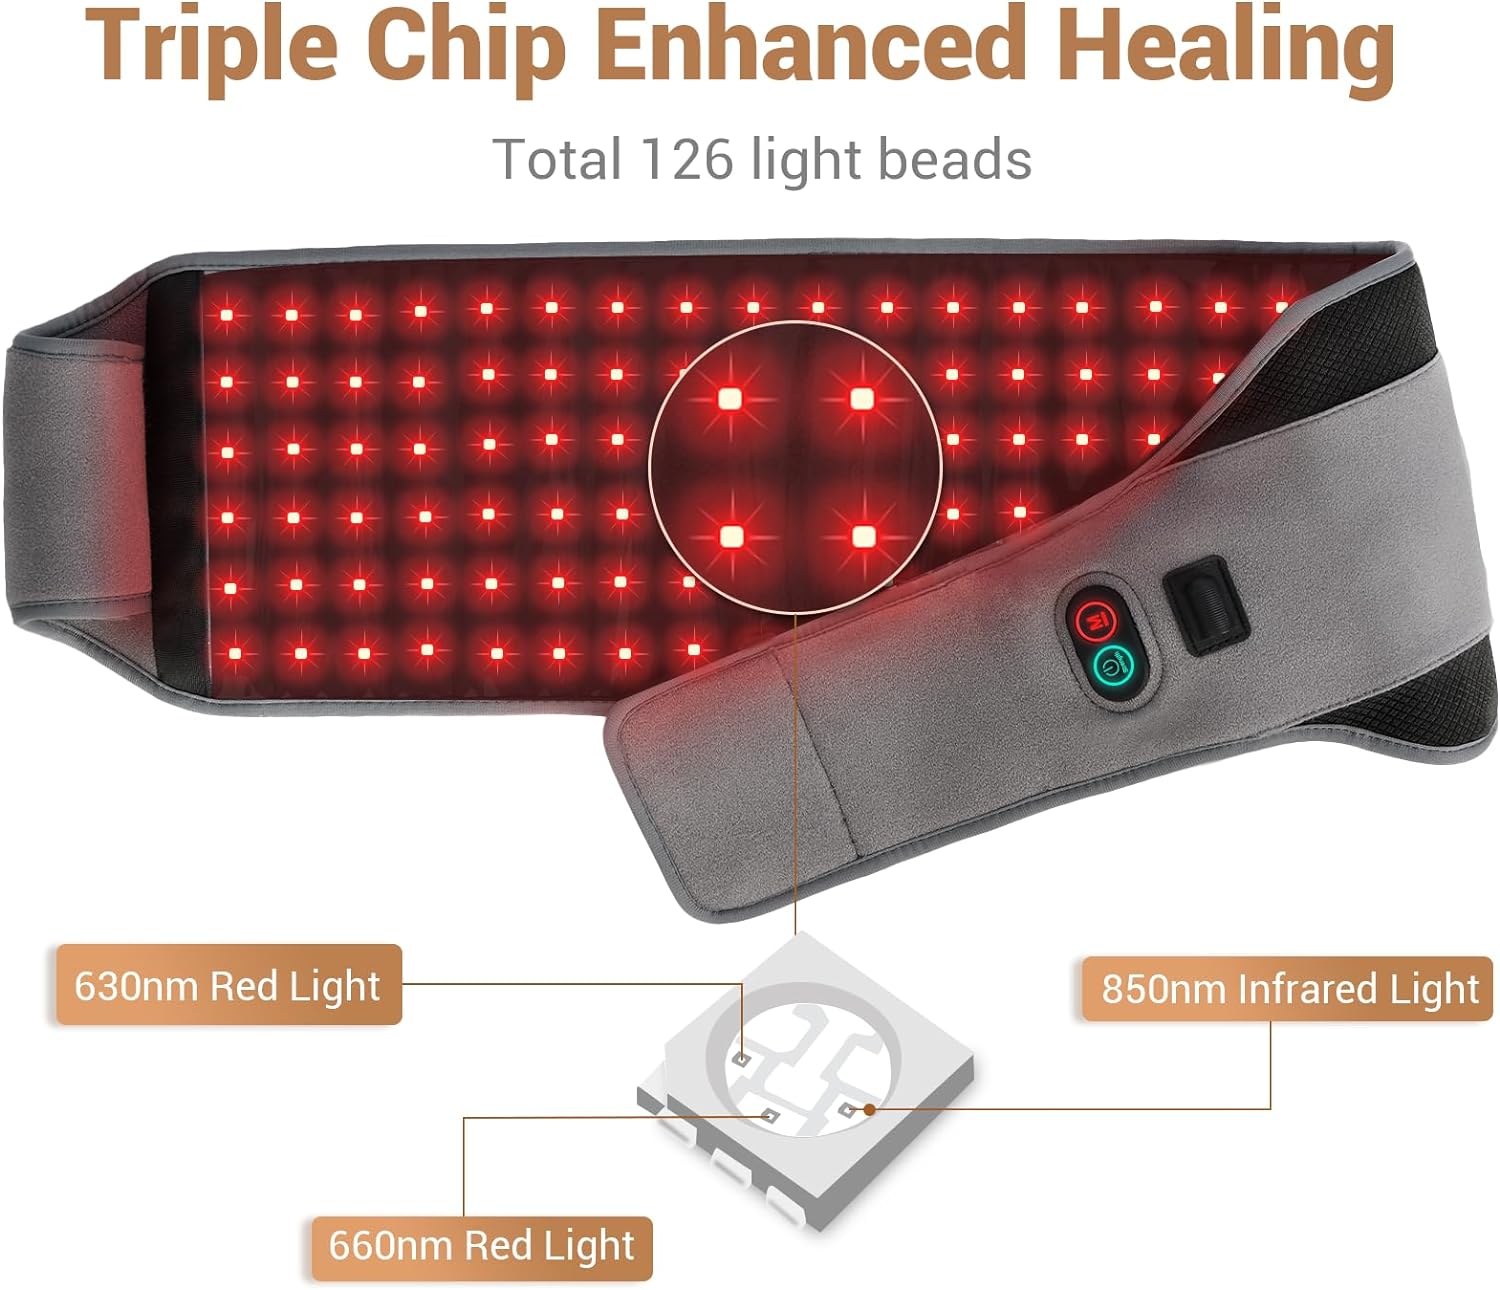 Comfytemp Red & Infrared Light Therapy Belt, Red Light Therapy for Body Device with App & Button Dual-Controlled